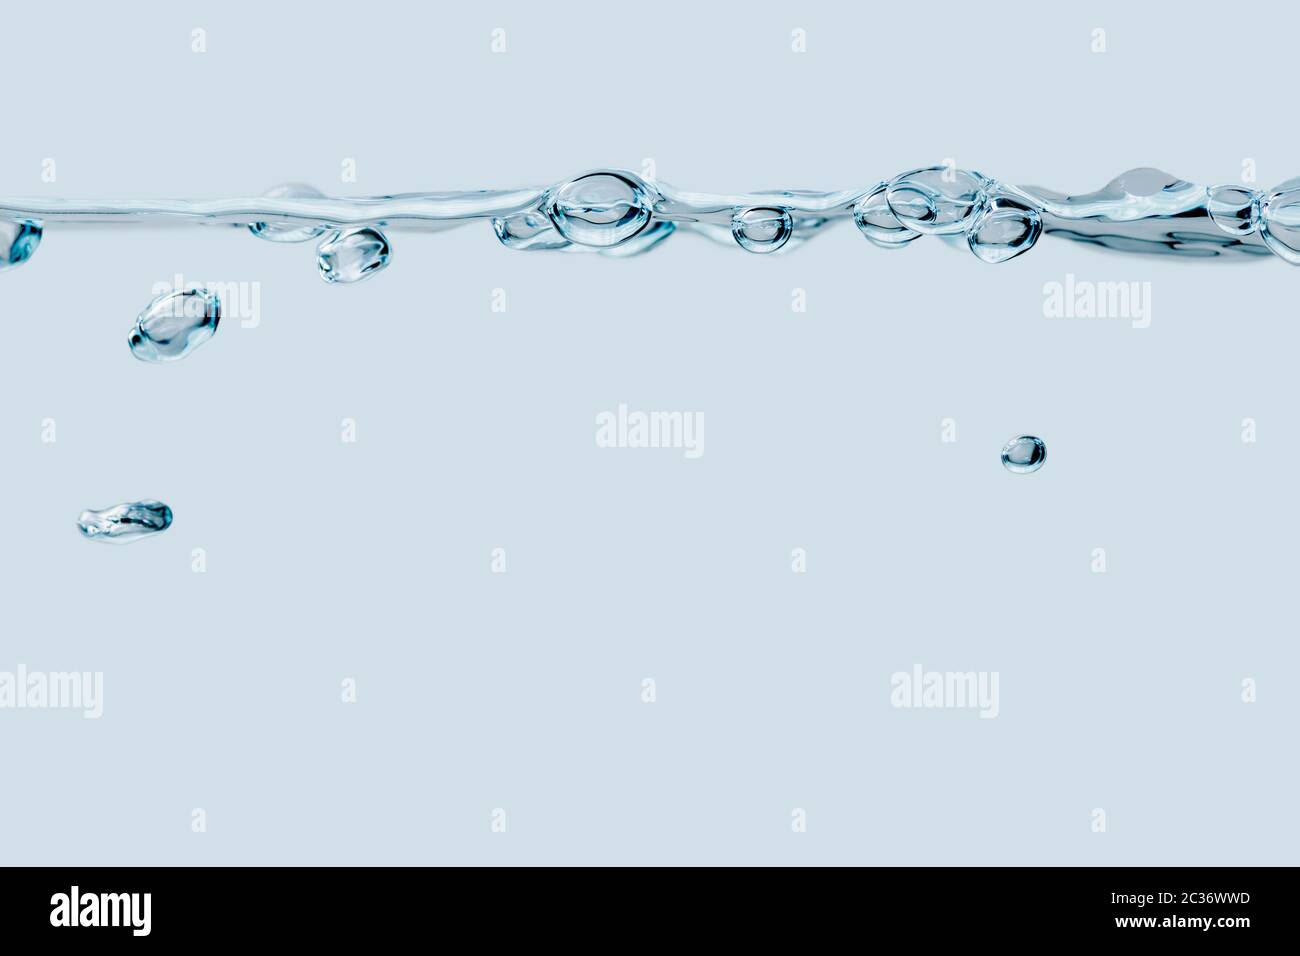 Studio shot of a series of air bubbles on the water surface with air bubbles rising underneath against a light blue background. Stock Photo